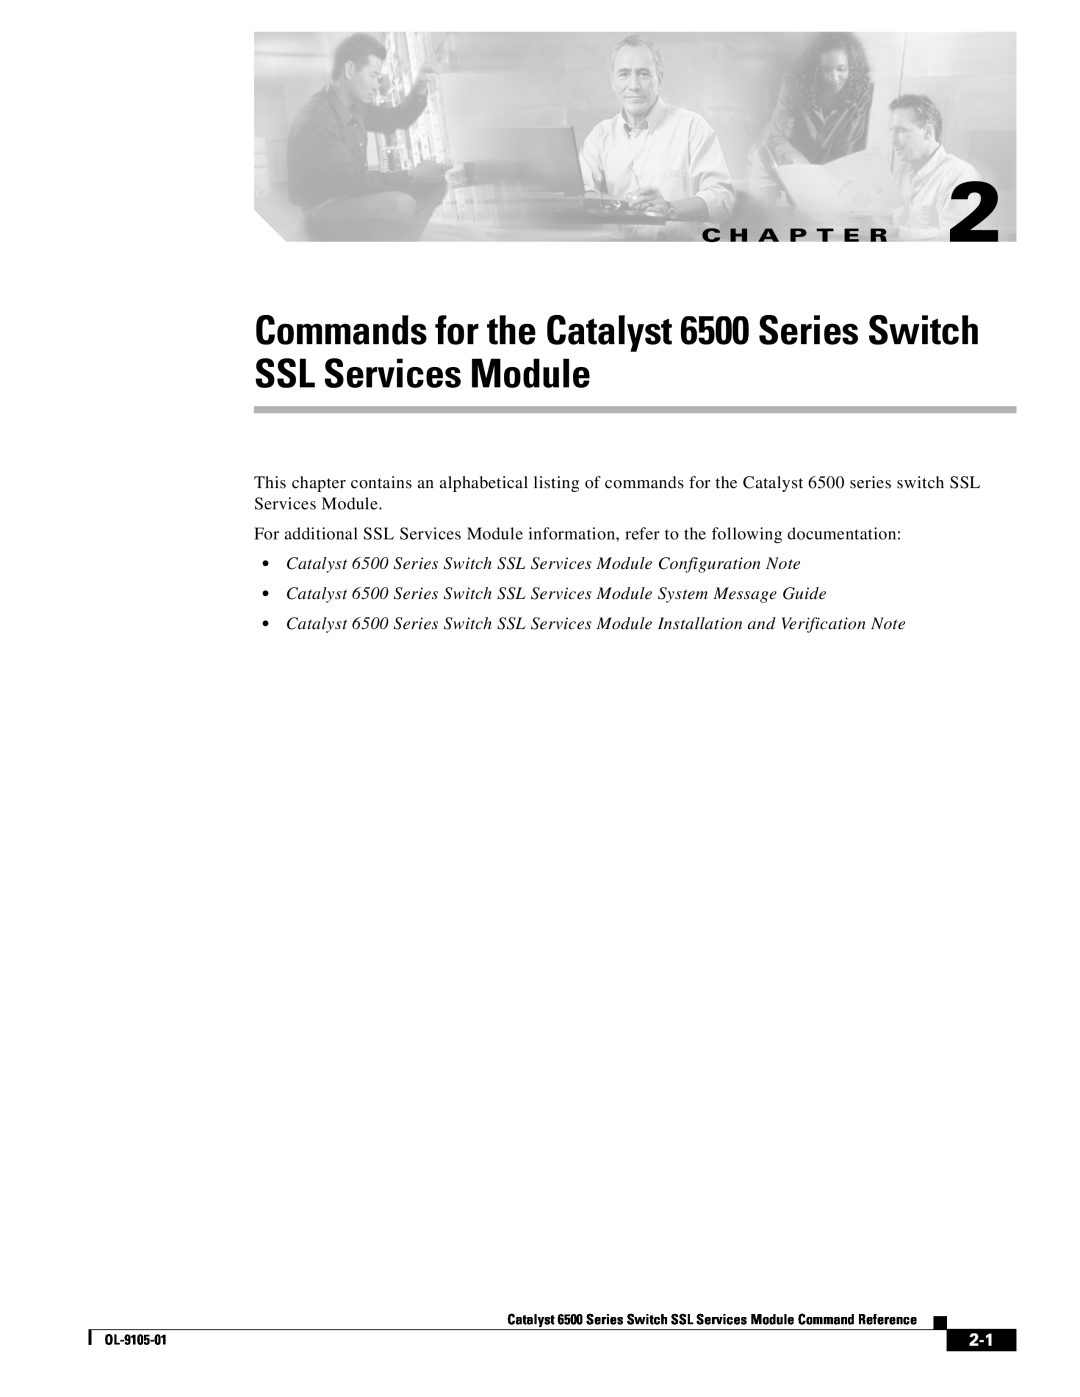 Cisco Systems manual Commands for the Catalyst 6500 Series Switch SSL Services Module, C H A P T E R 